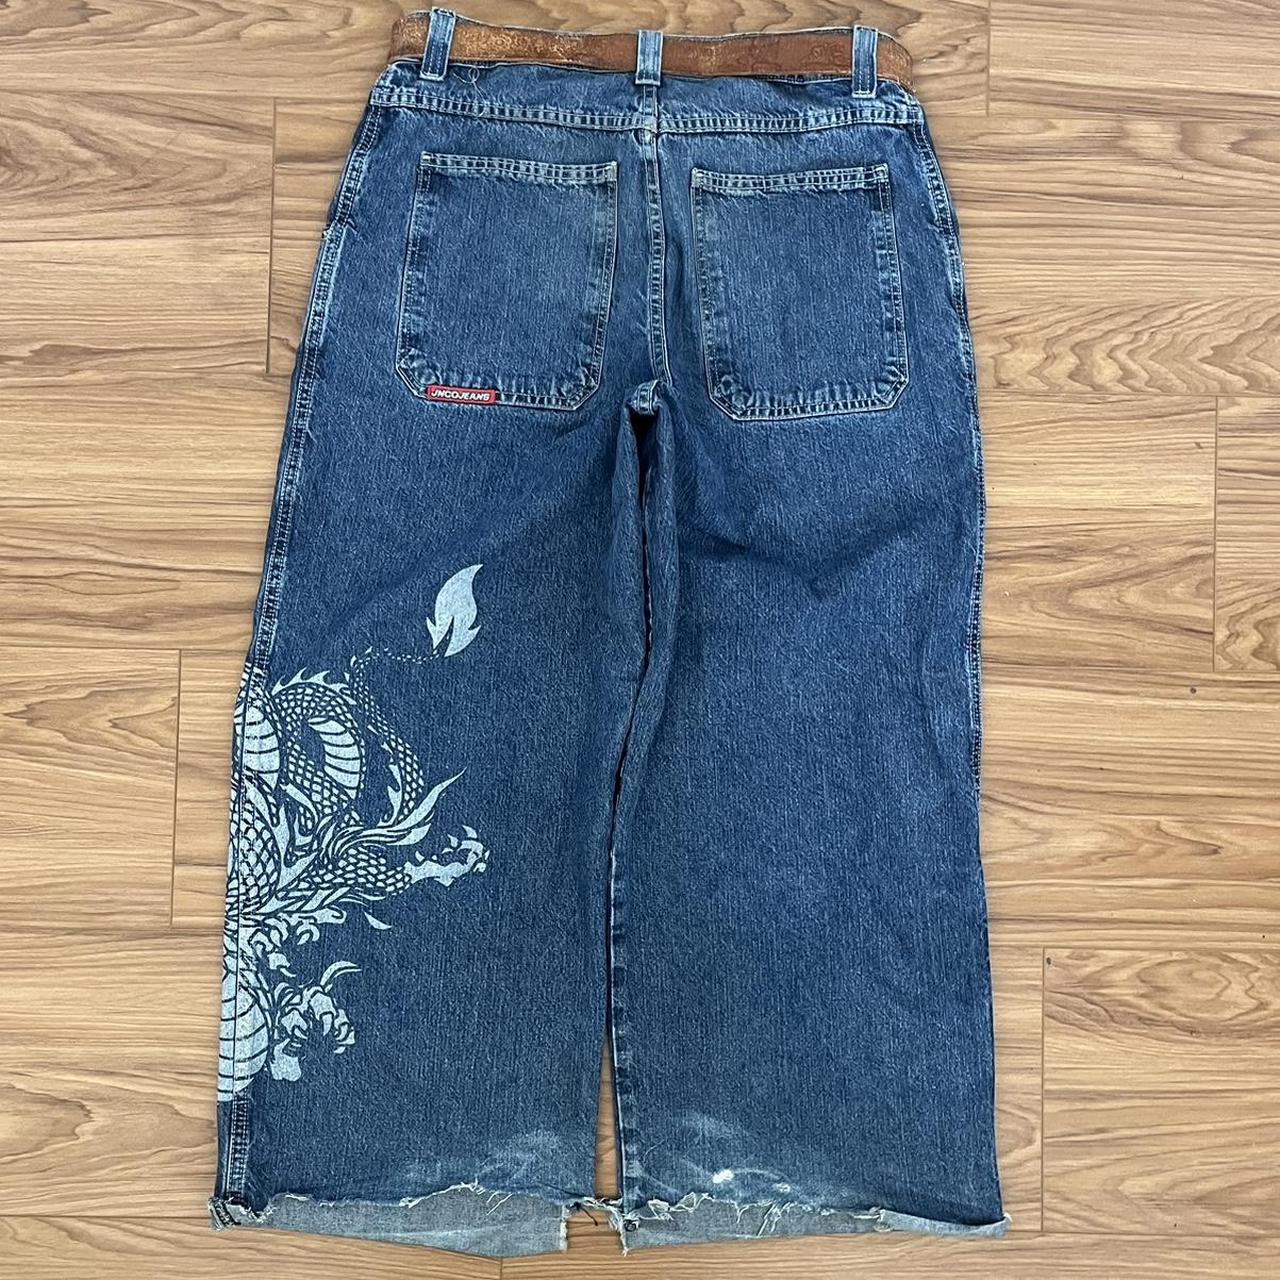 JNCO DRAGON TRIBAL JEANS DEPOP PAYMENTS ONLY NOT... - Depop